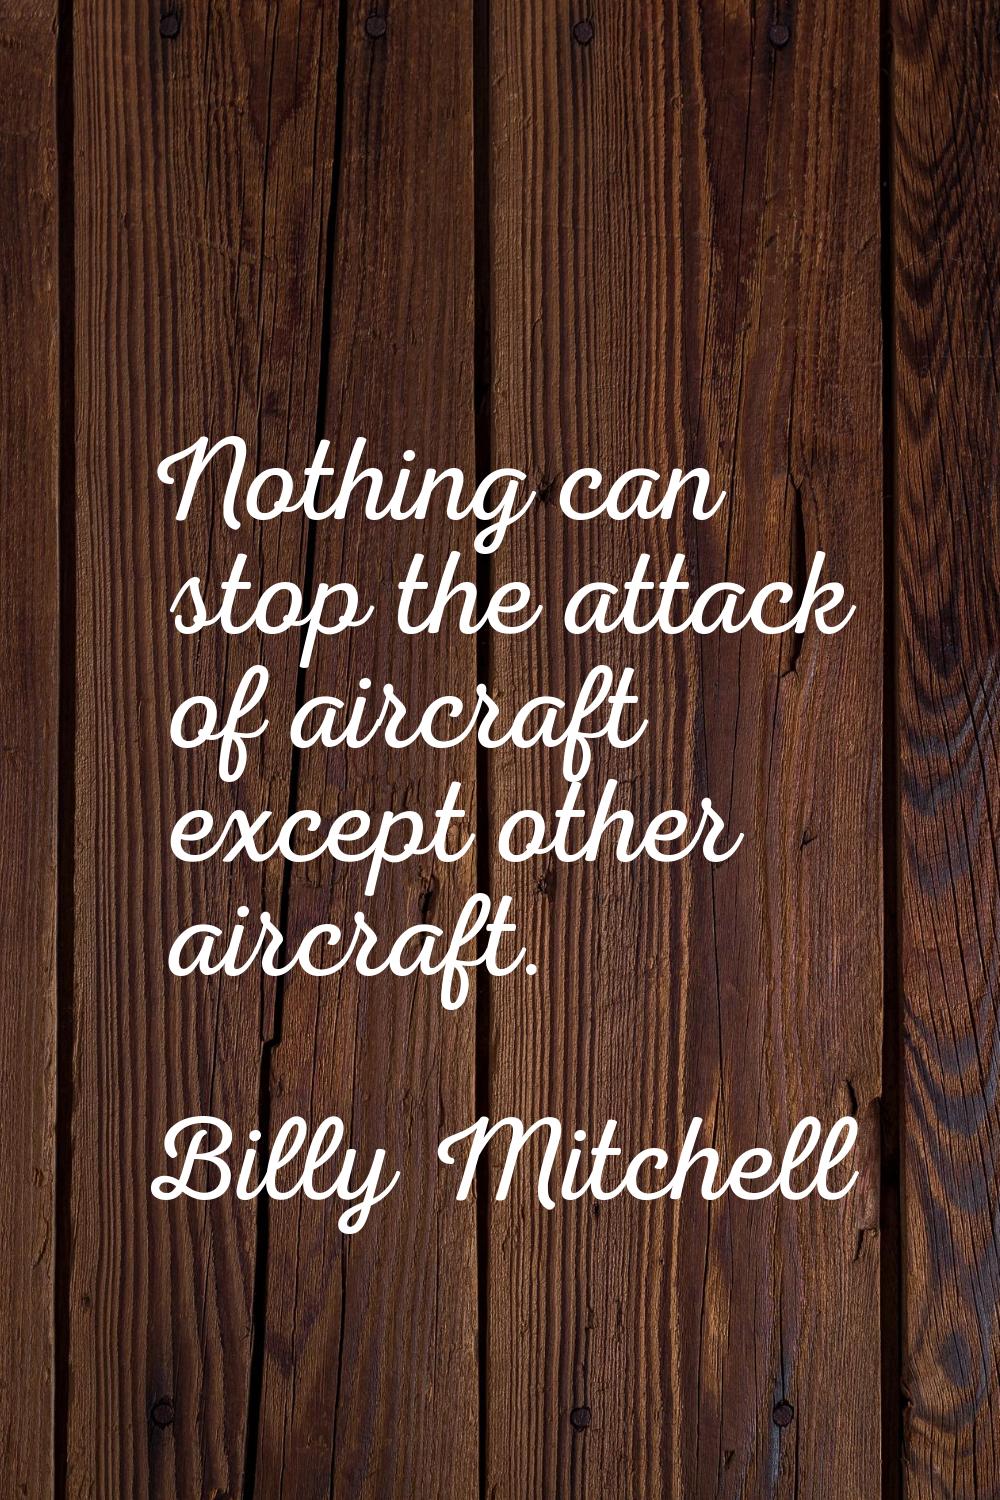 Nothing can stop the attack of aircraft except other aircraft.